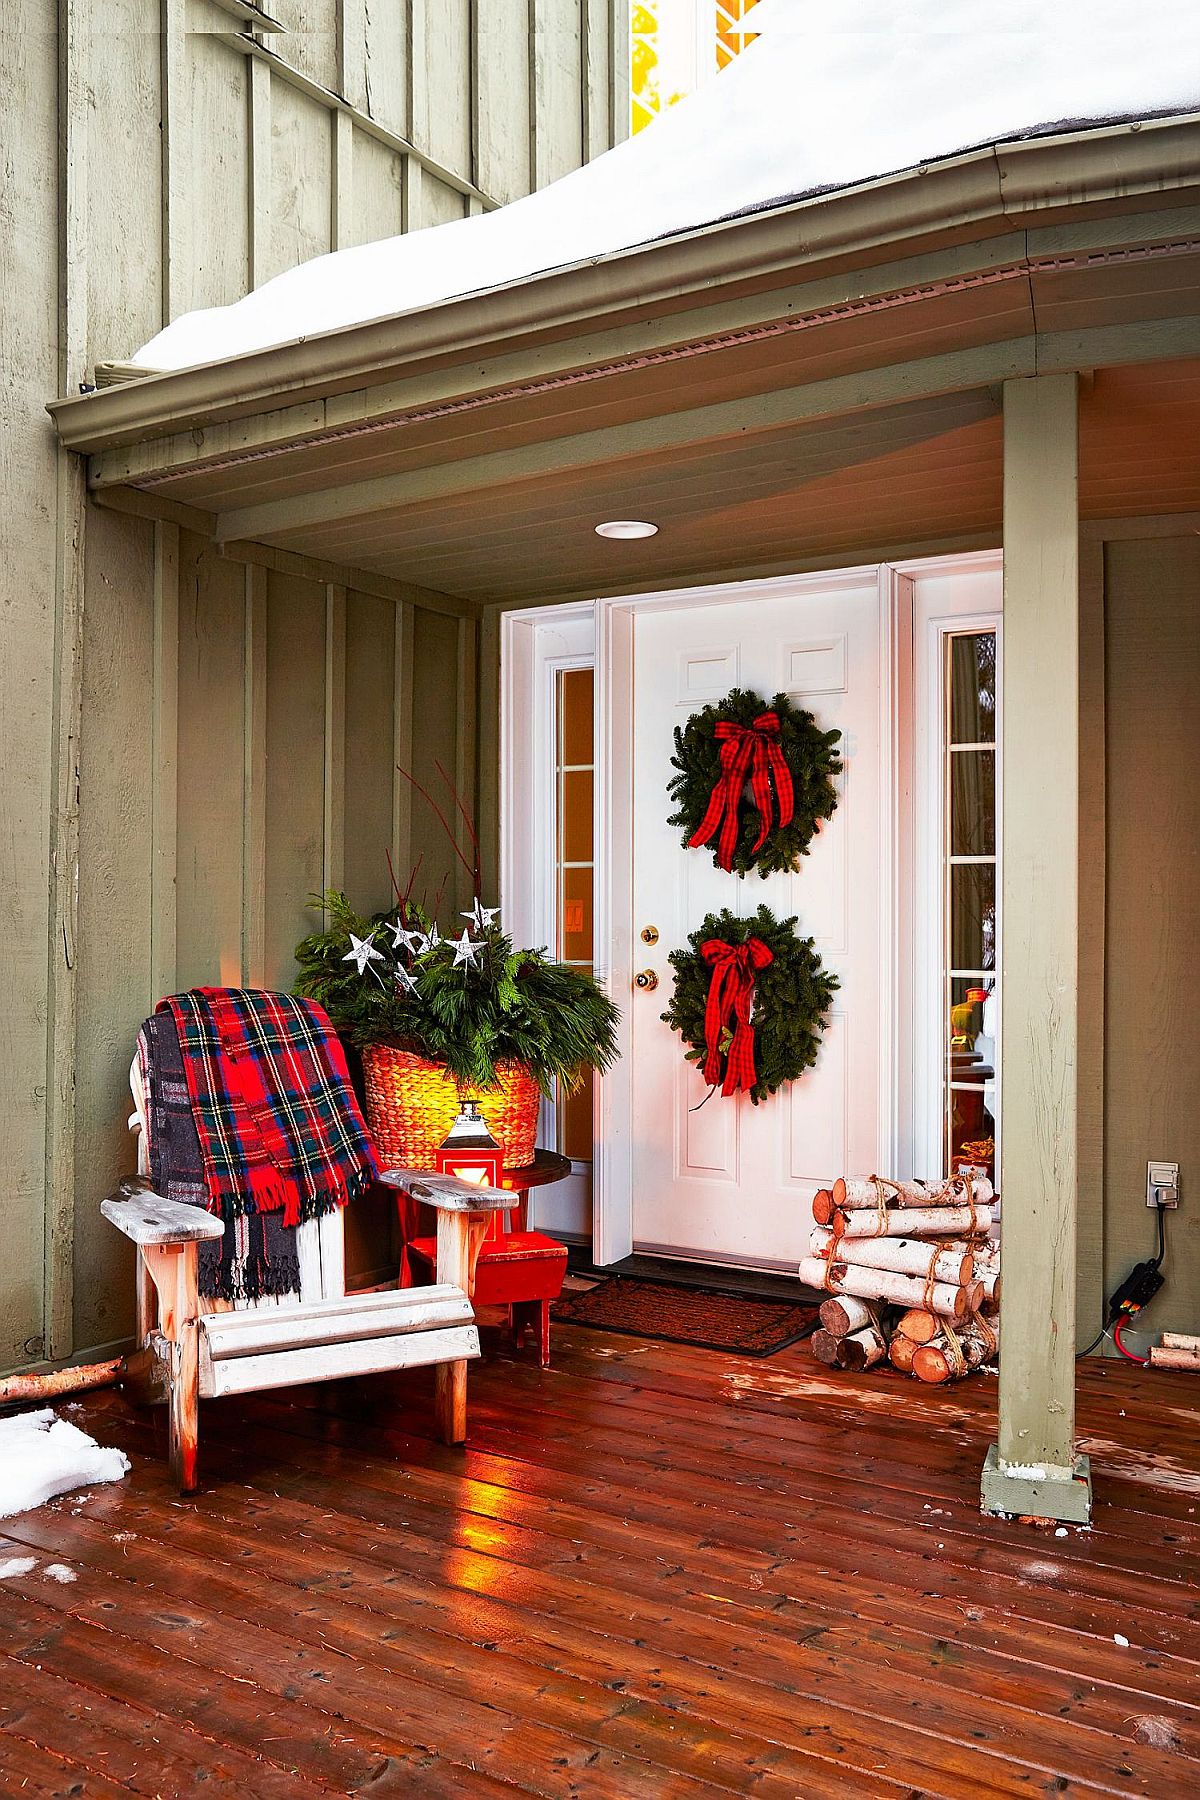 Plaid-pattern-holiday-wreath-and-greenery-used-to-decorate-the-festive-porch-27953